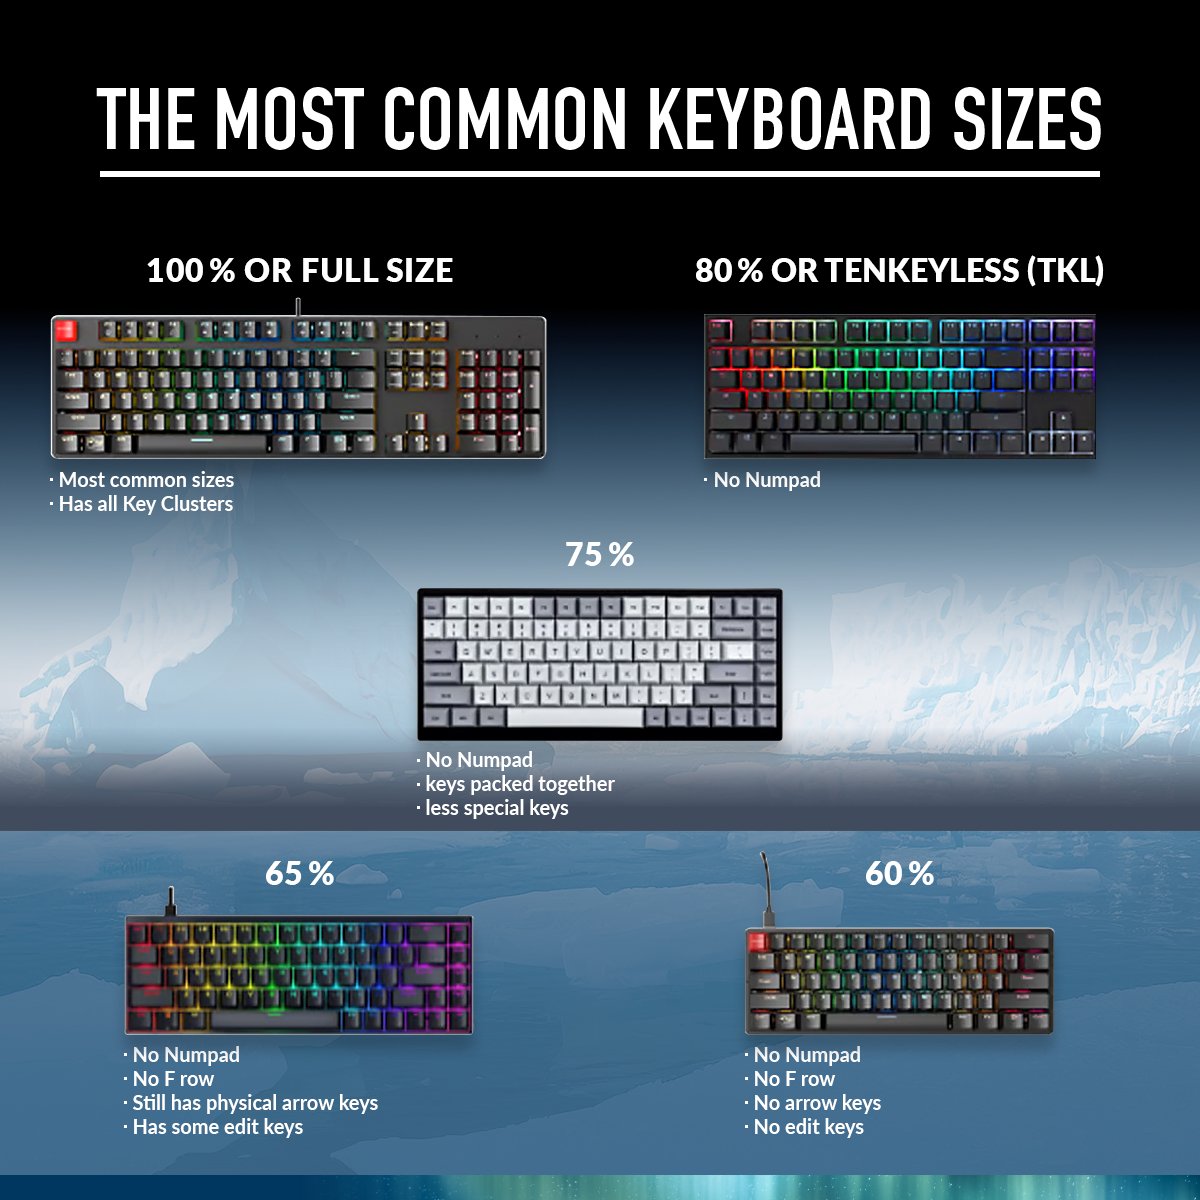 Gamers! 🎮 Let's chat keyboards! The right one can transform your gaming. What size do you prefer? TKL for agility or full layout for macros? Share!🌟 #GamingKeyboards #ARCTIC #ARCTICool #GamingTech #gaming #keyboard #cooledbyARCTIC #coolerthanever #thecoolerway #GamingEssentials